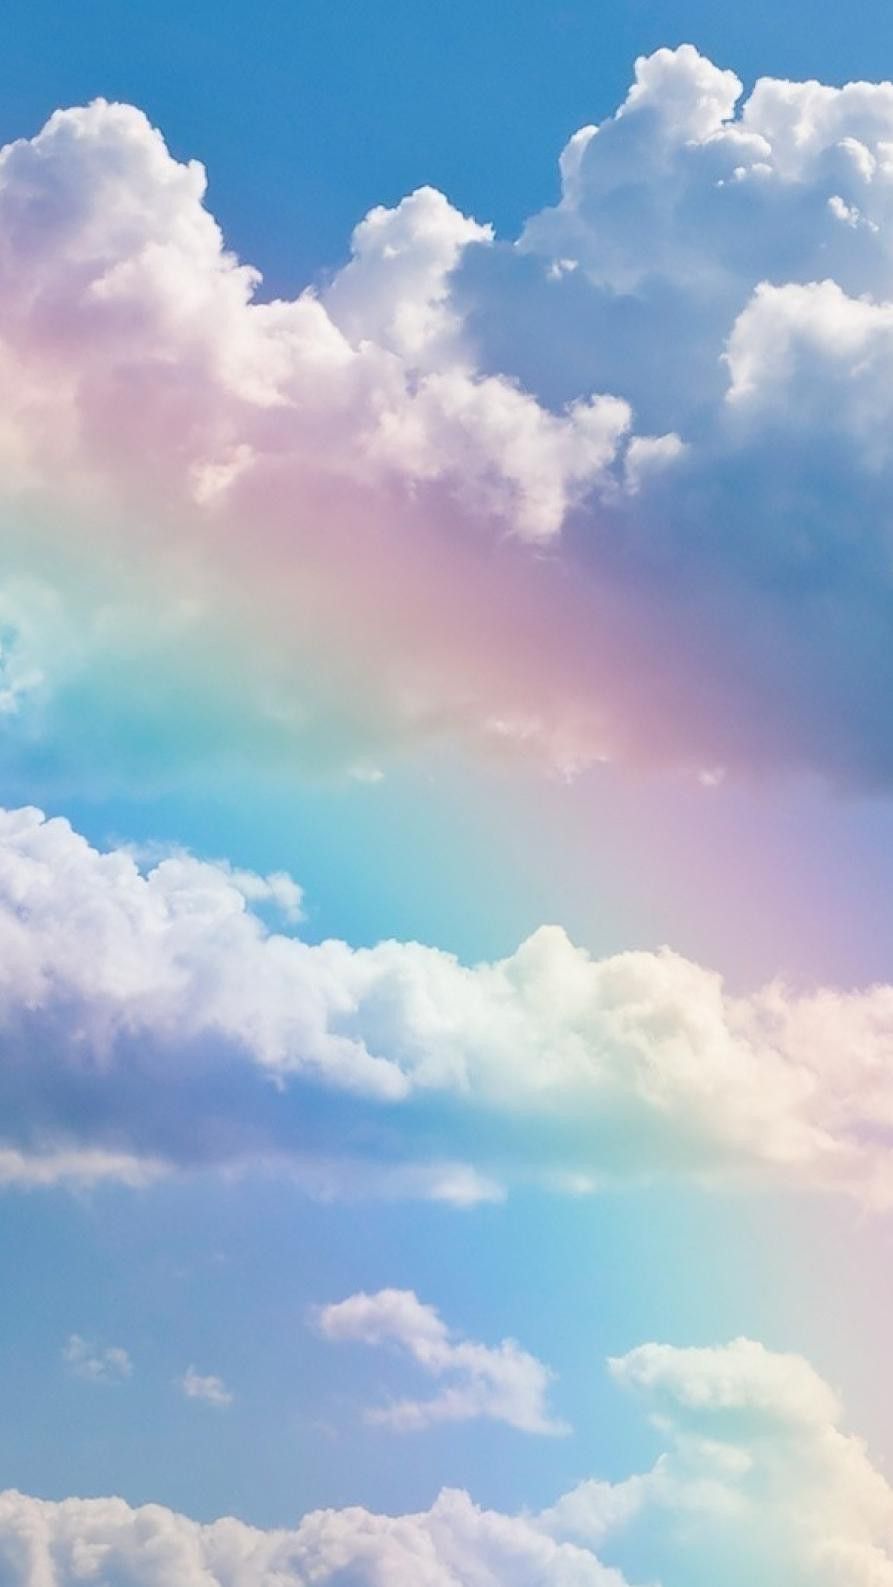 Cloud and Rainbow Wallpaper